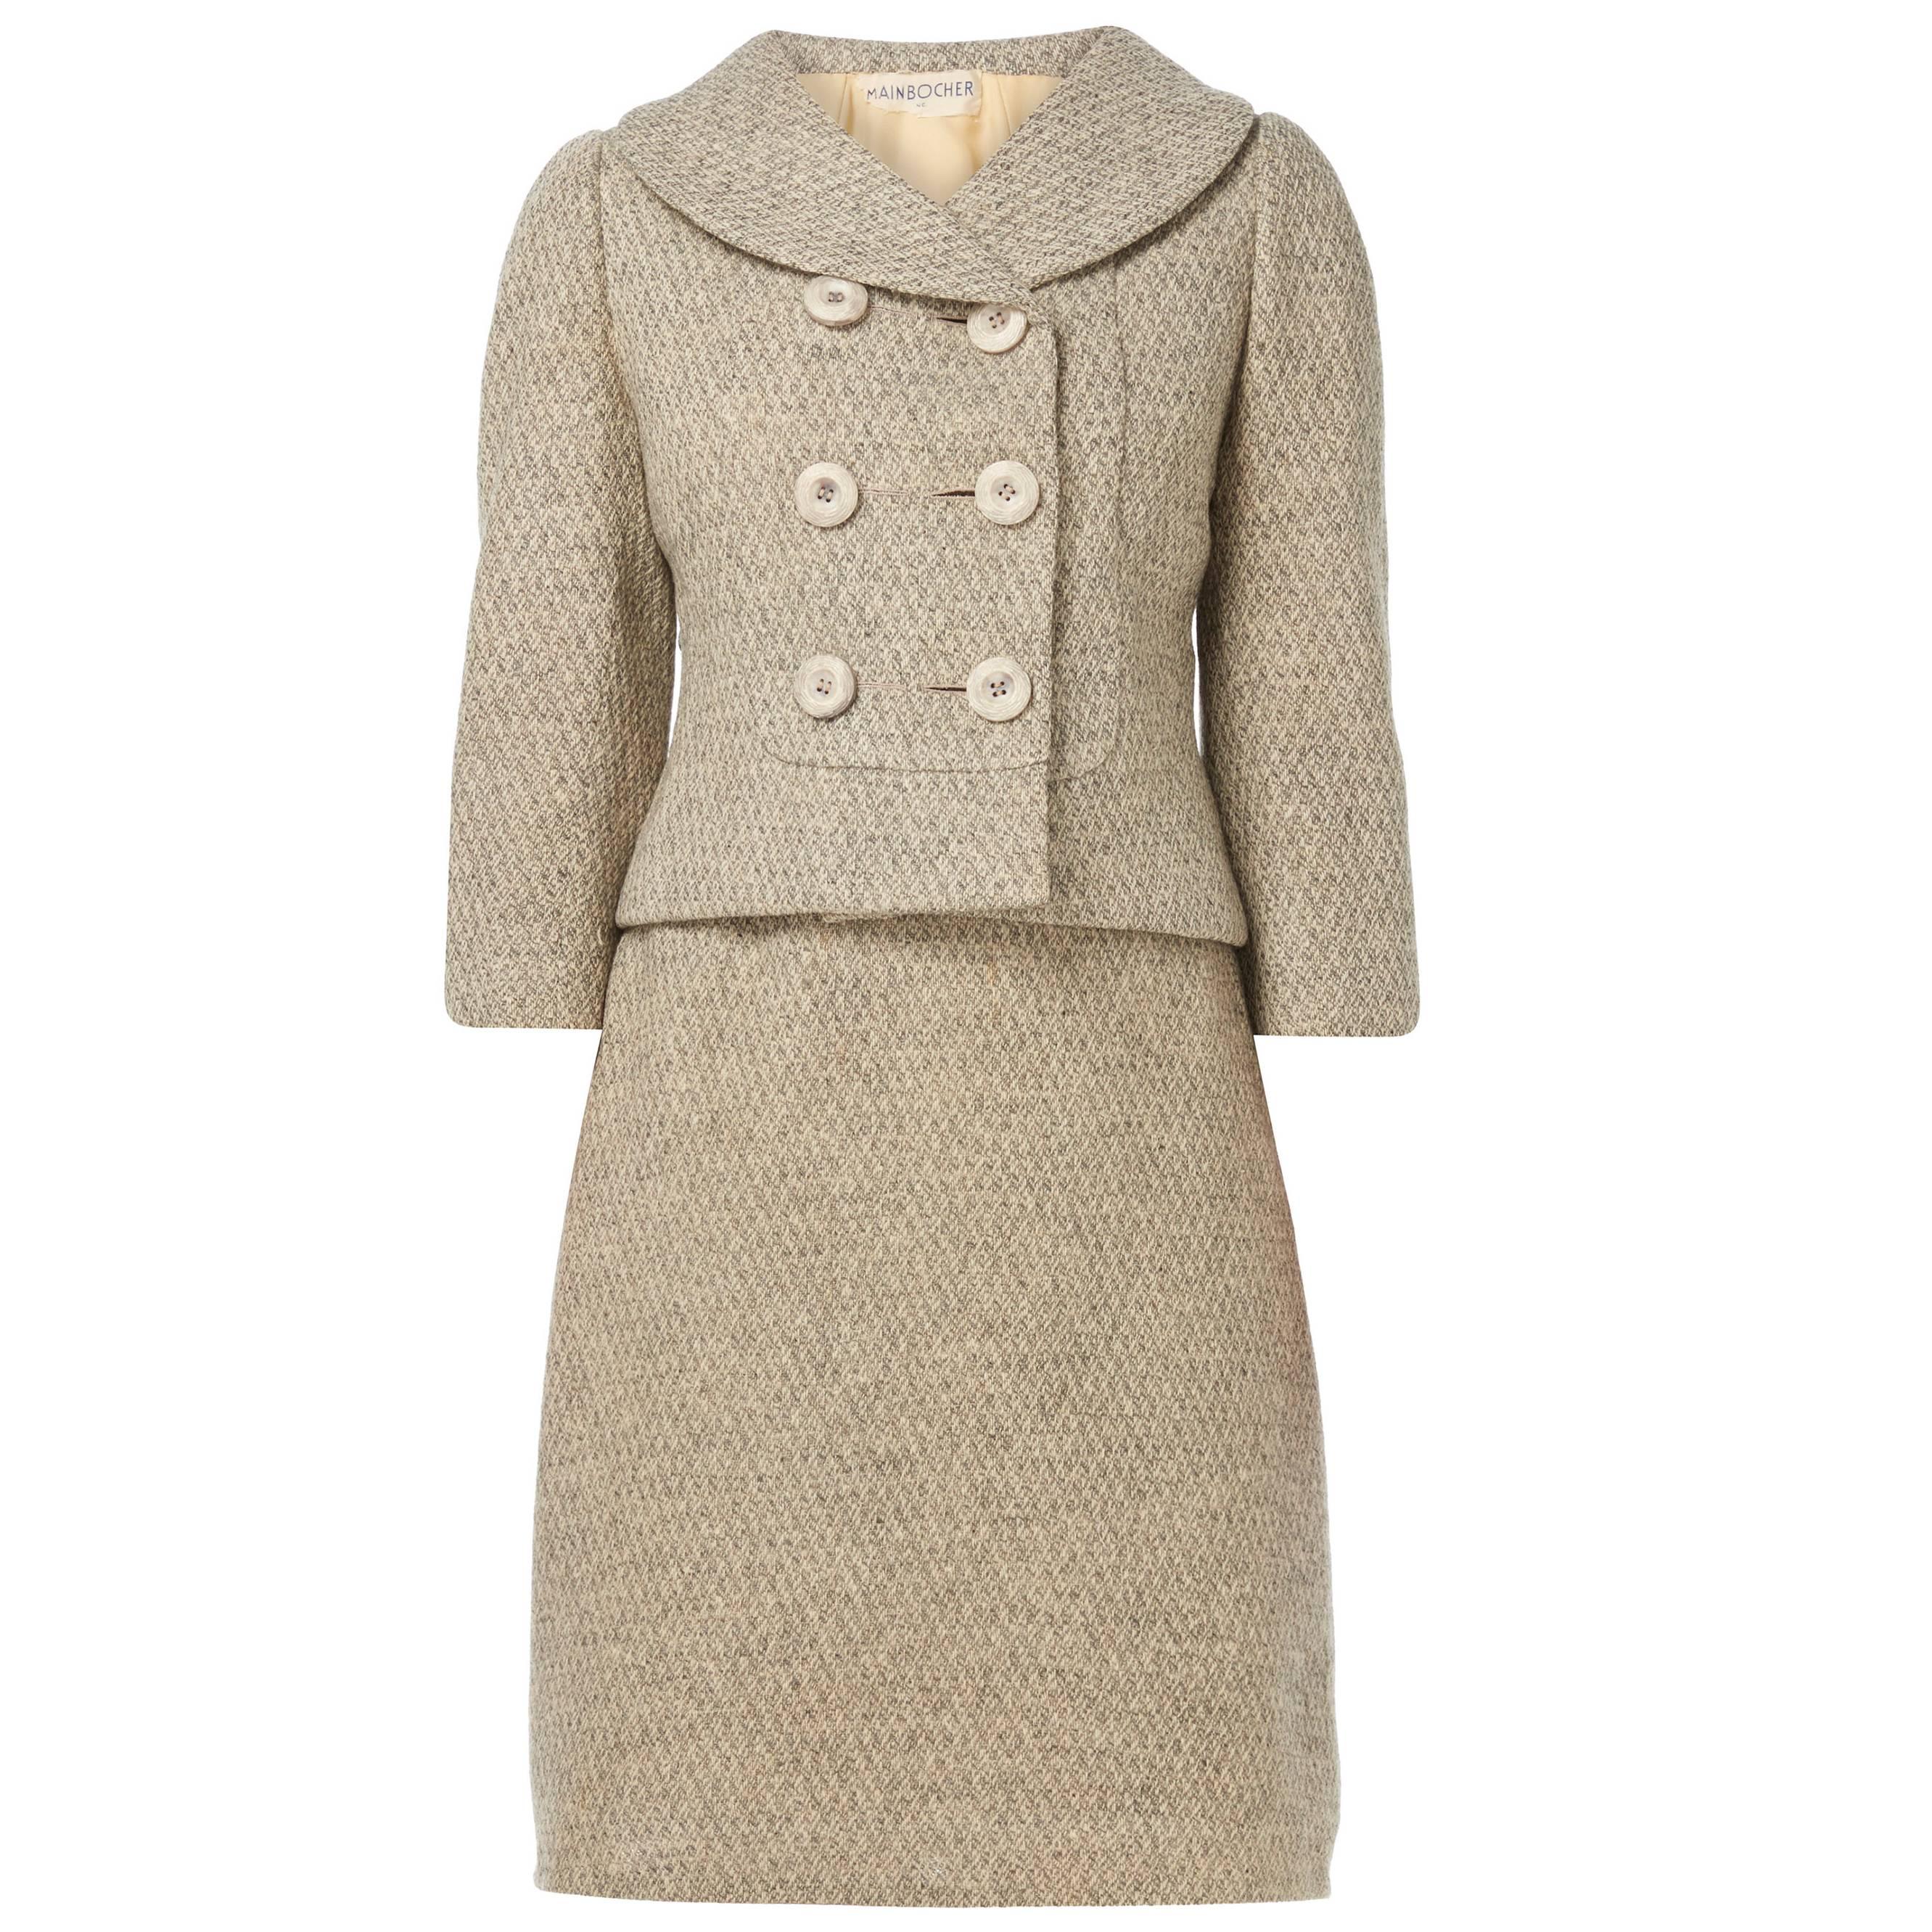 Mainbocher haute couture tweed skirt suit, circa 1960 For Sale